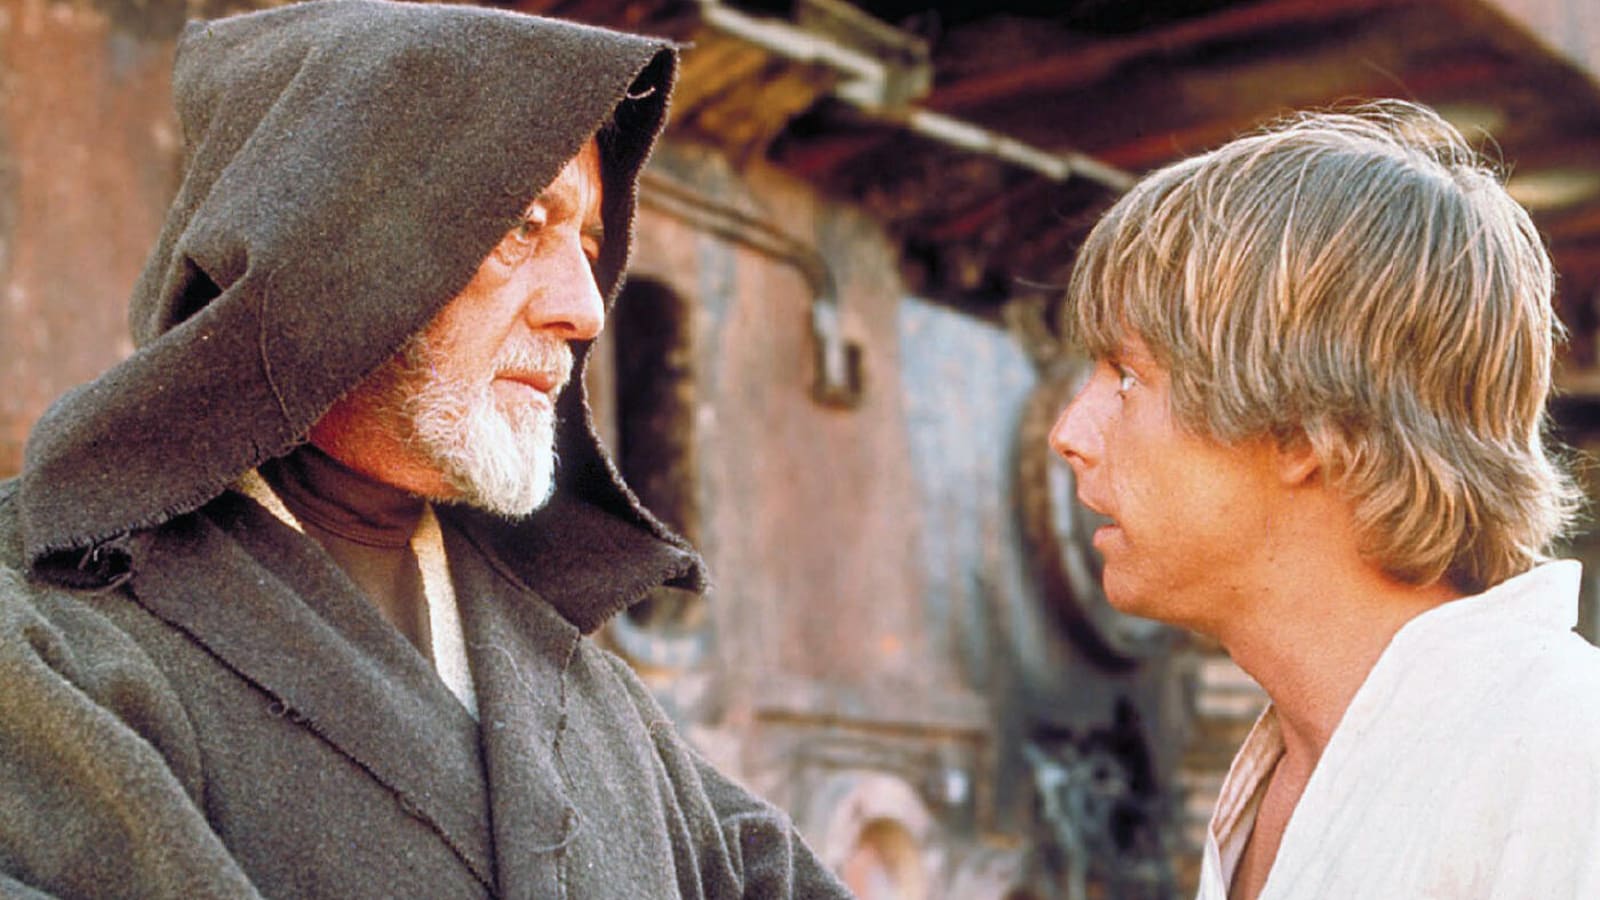 The most memorable quotes from the 'Star Wars' films